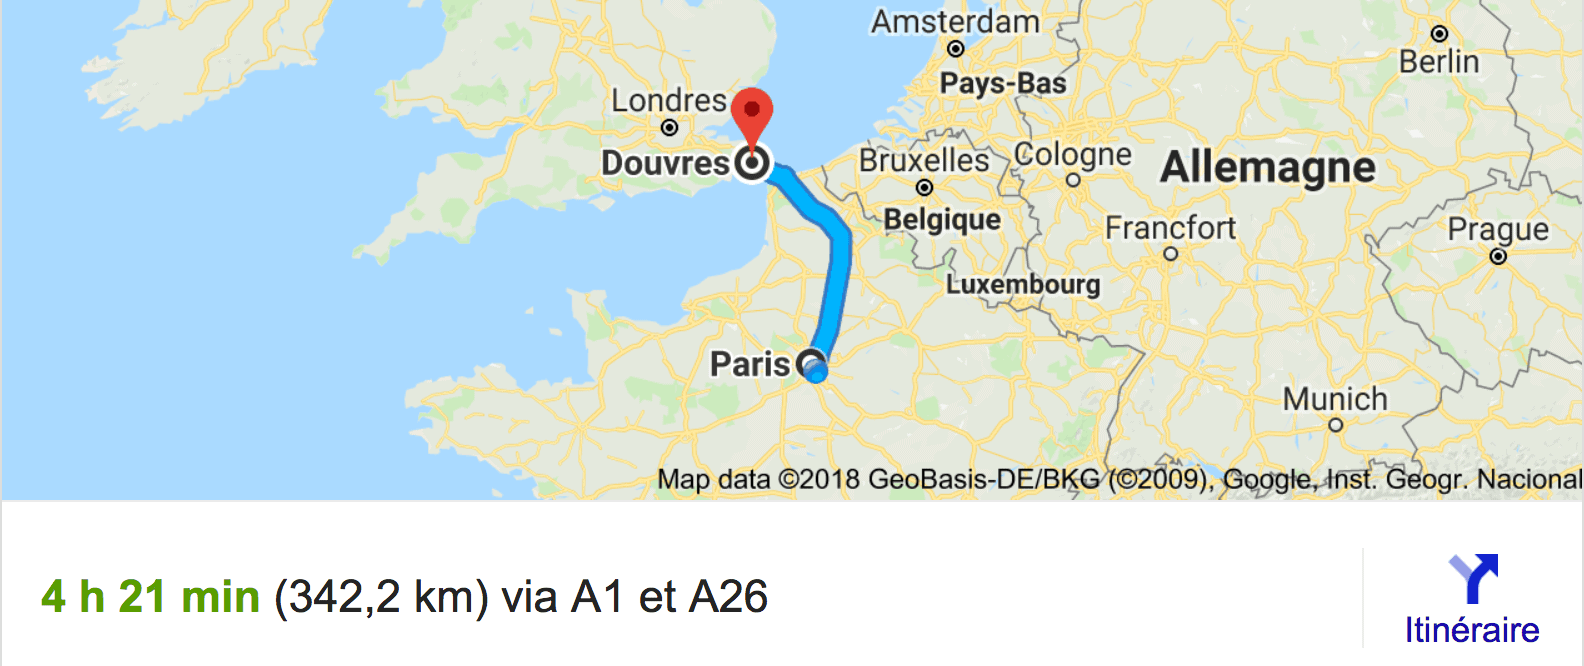 cheapest travel from dover to paris